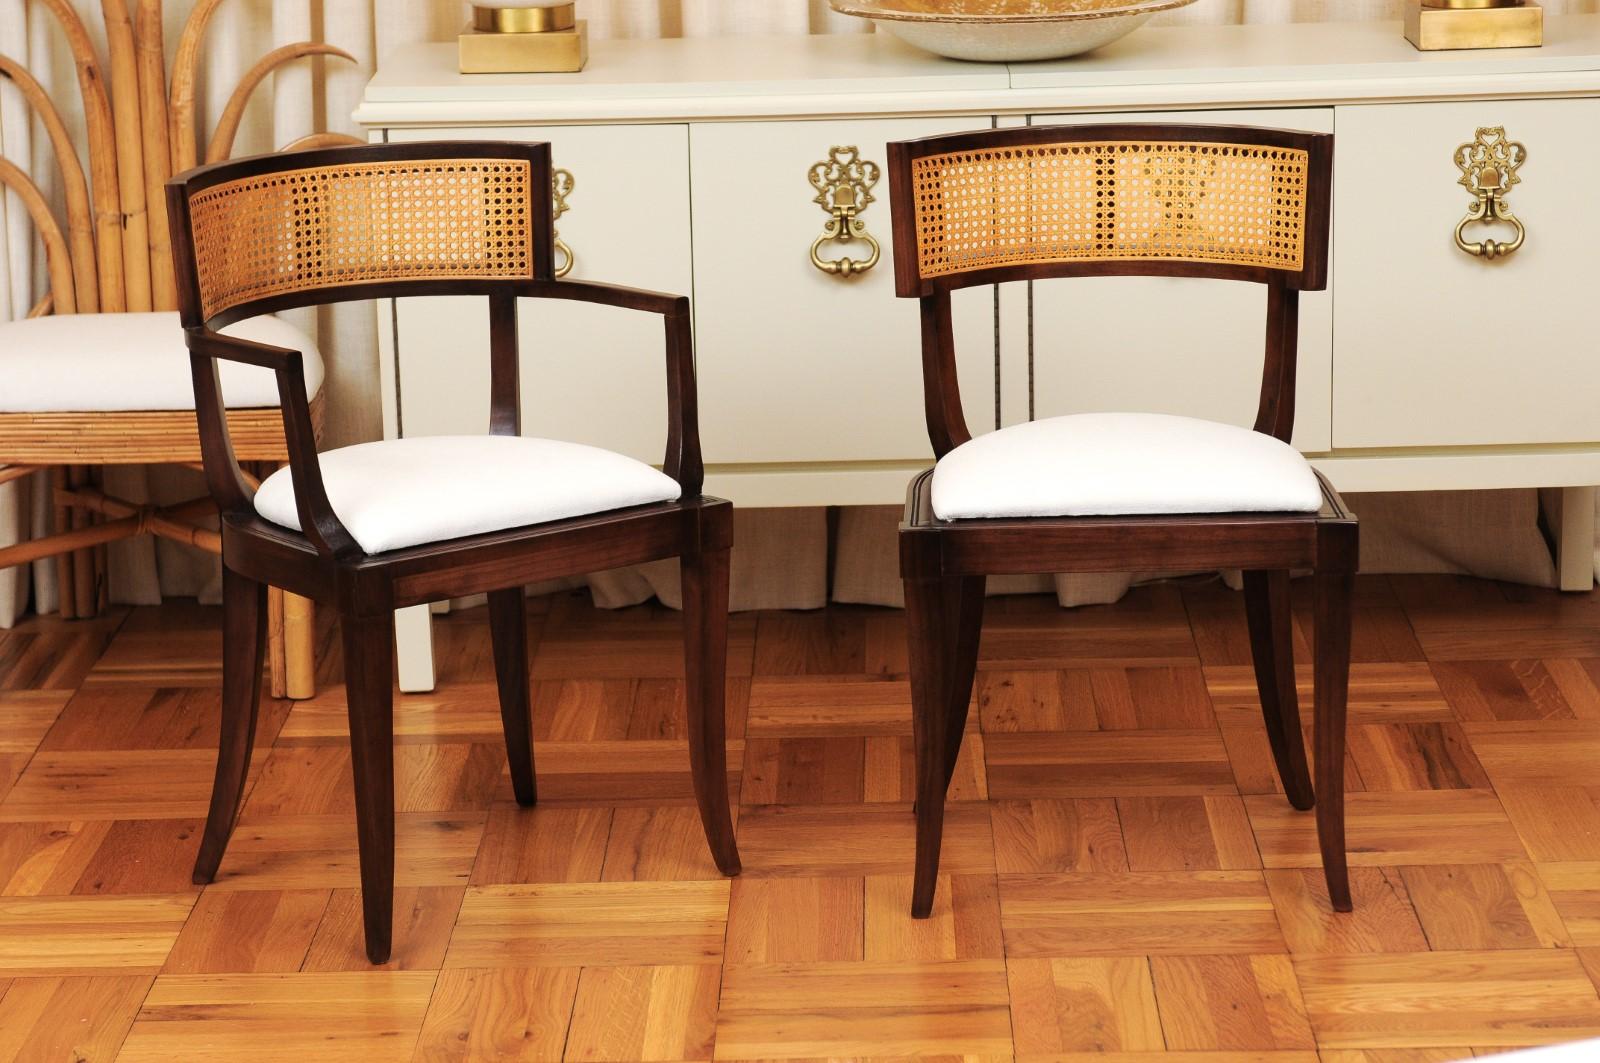 These magnificent dining chairs are shipped as professionally photographed and described in the listing narrative, completely installation ready. This large set of difficult to find examples is unique on the market. Expert custom upholstery service